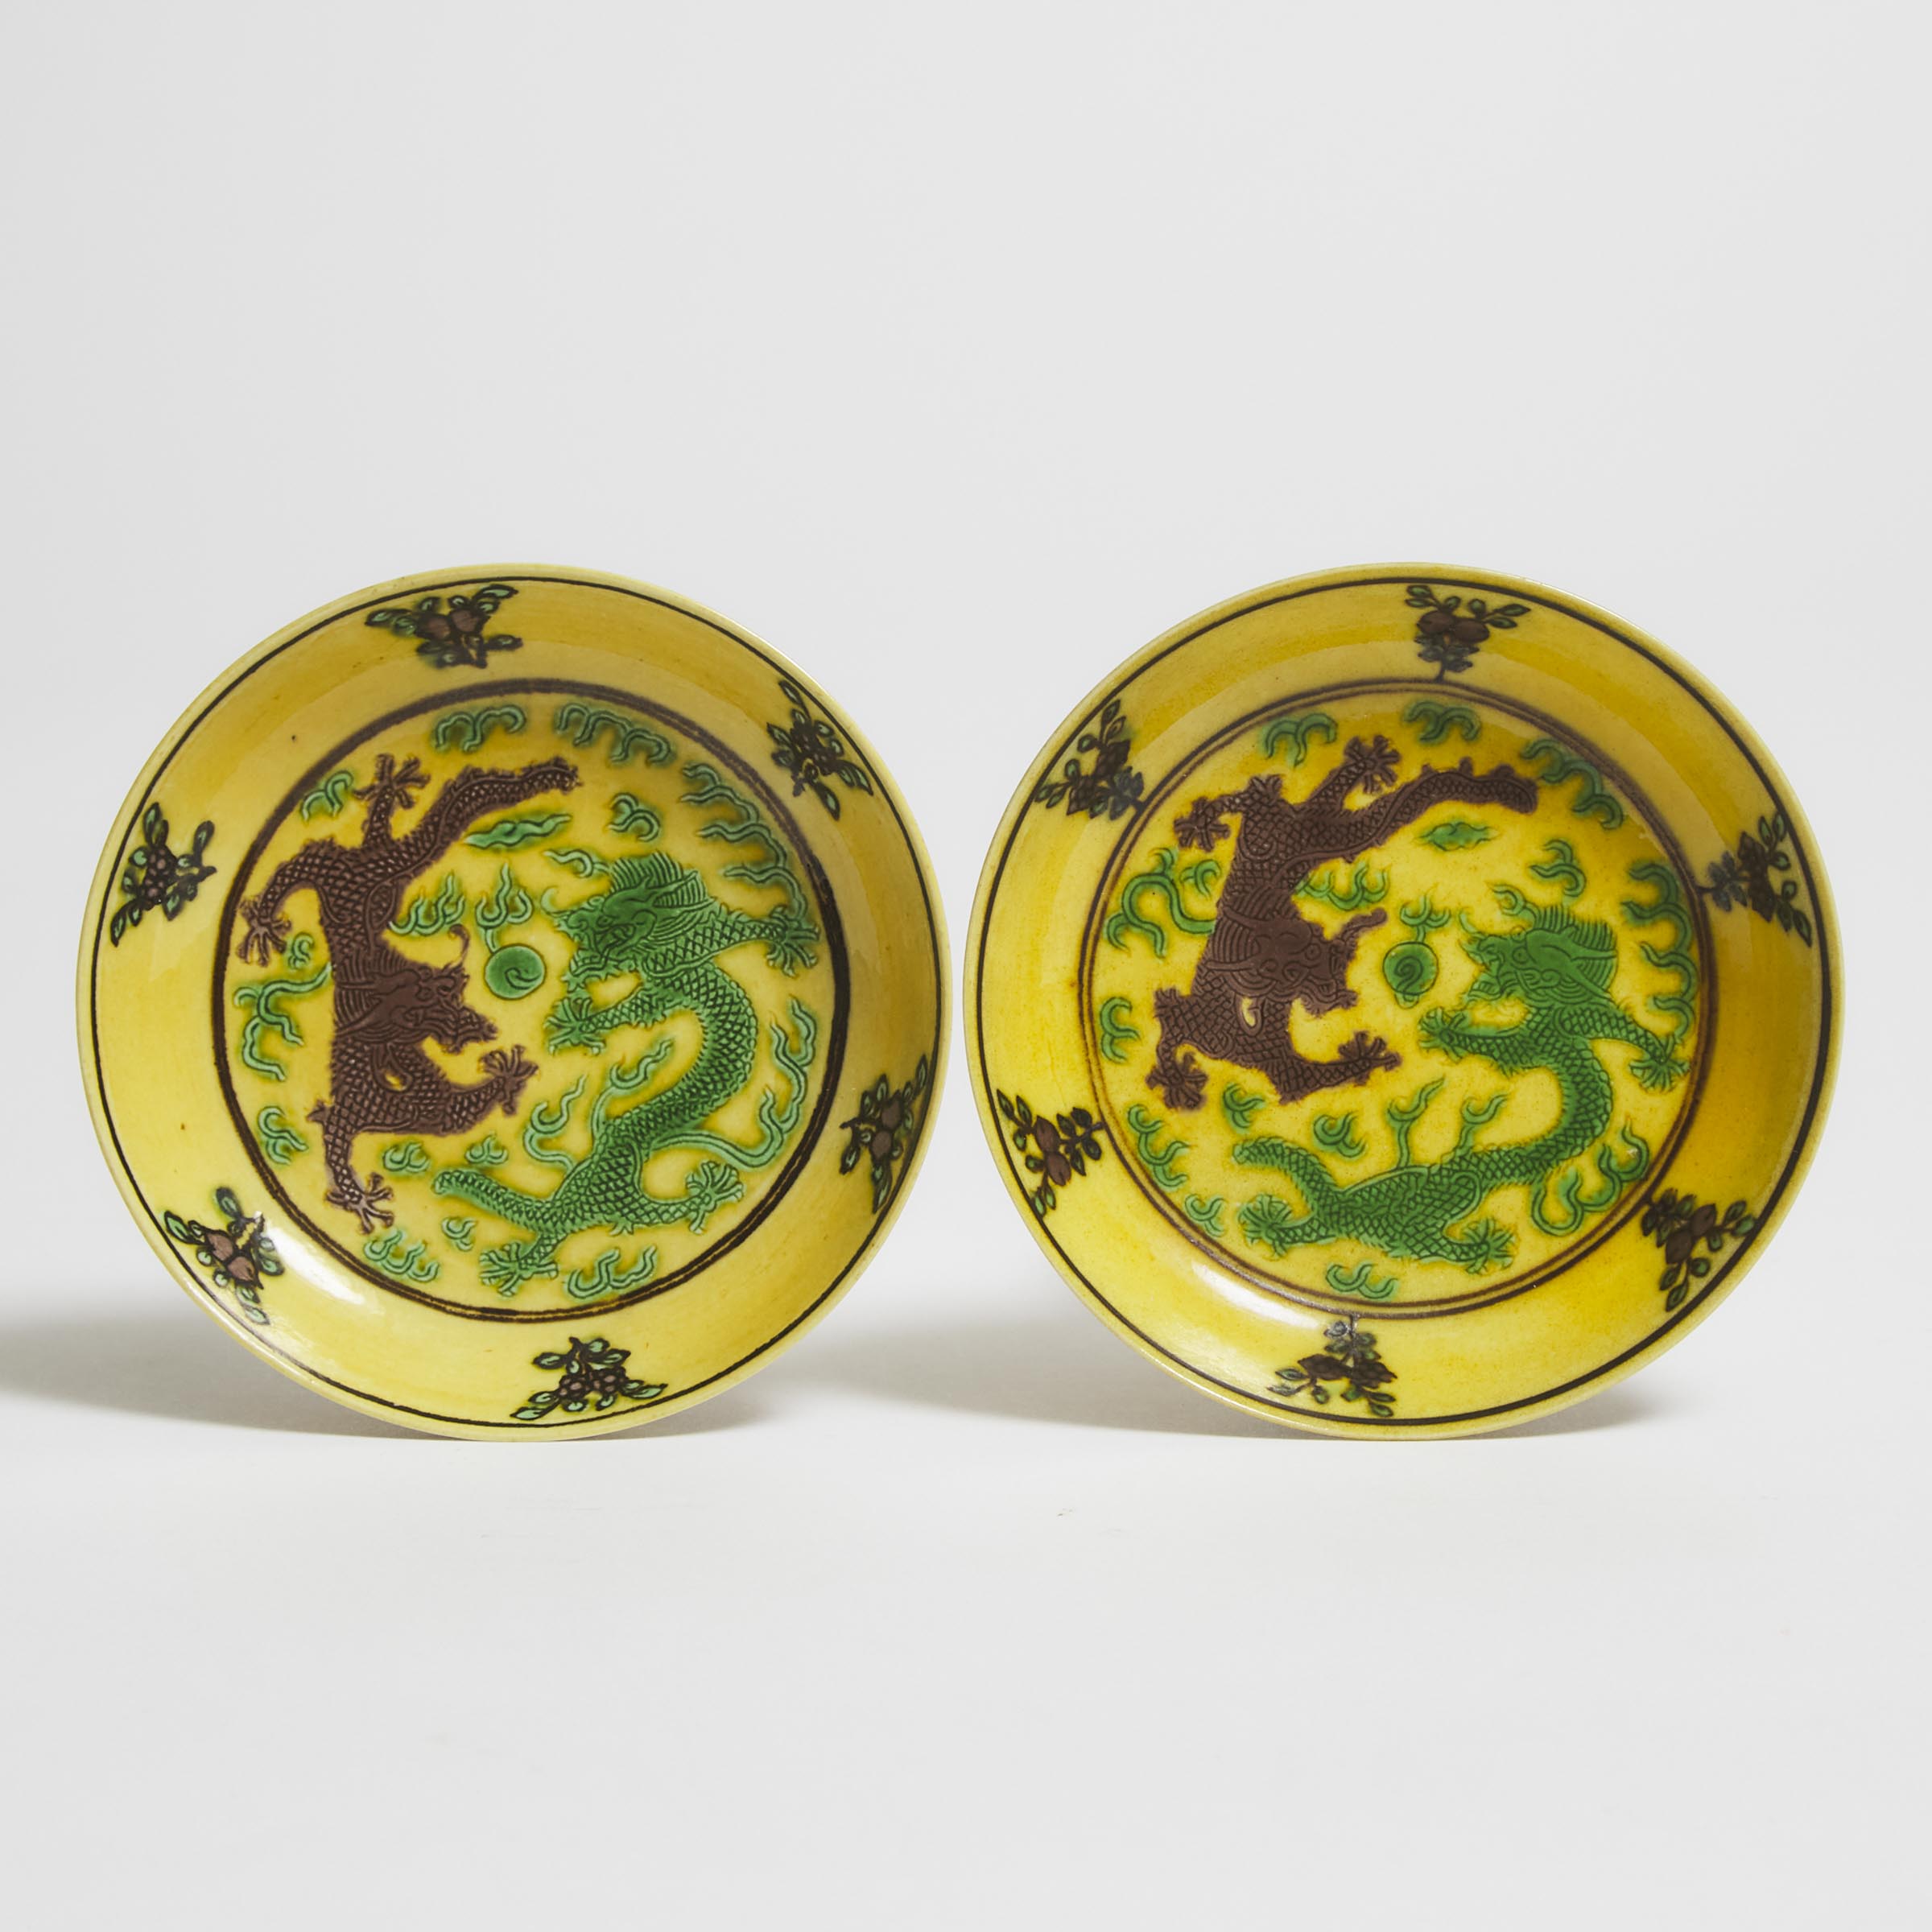 A Pair of Green and Aubergine Enameled 'Dragon' Dishes, Guangxu Mark and Period (1875-1908)